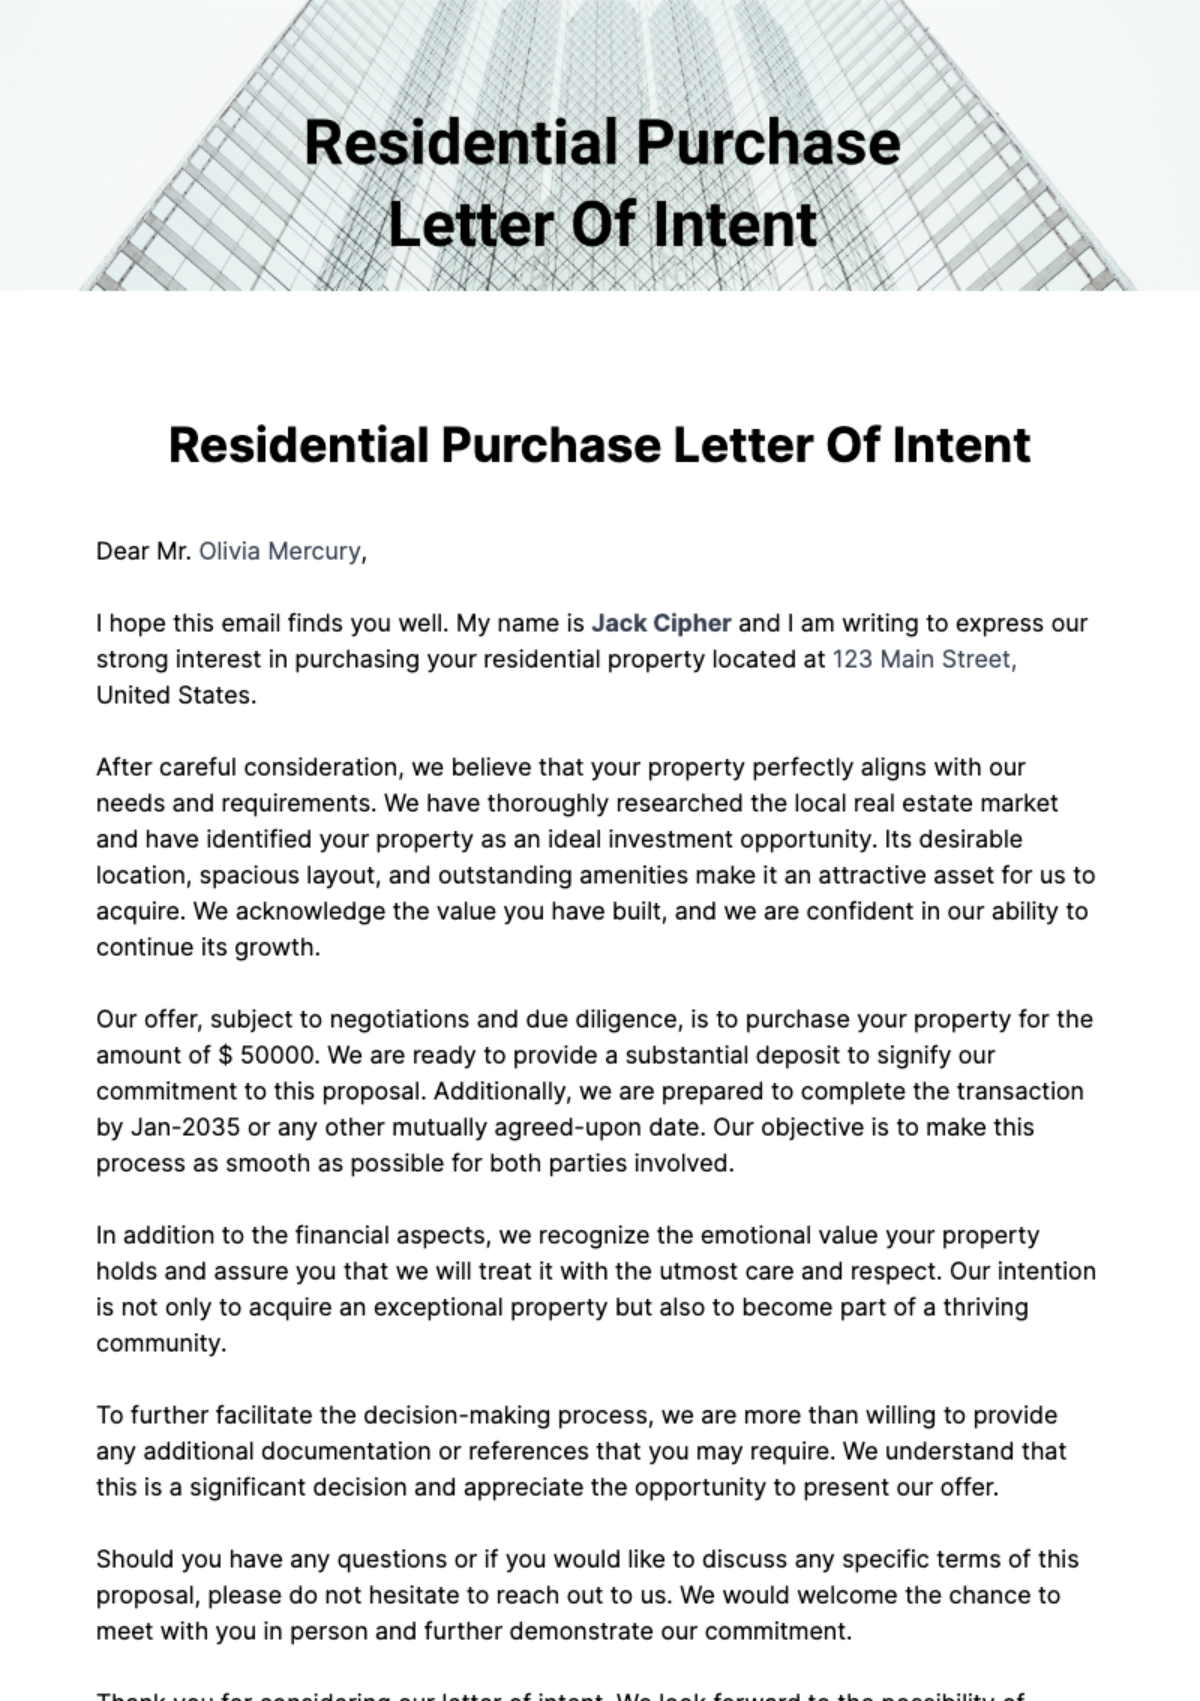 Free Residential Purchase Letter Of Intent Template